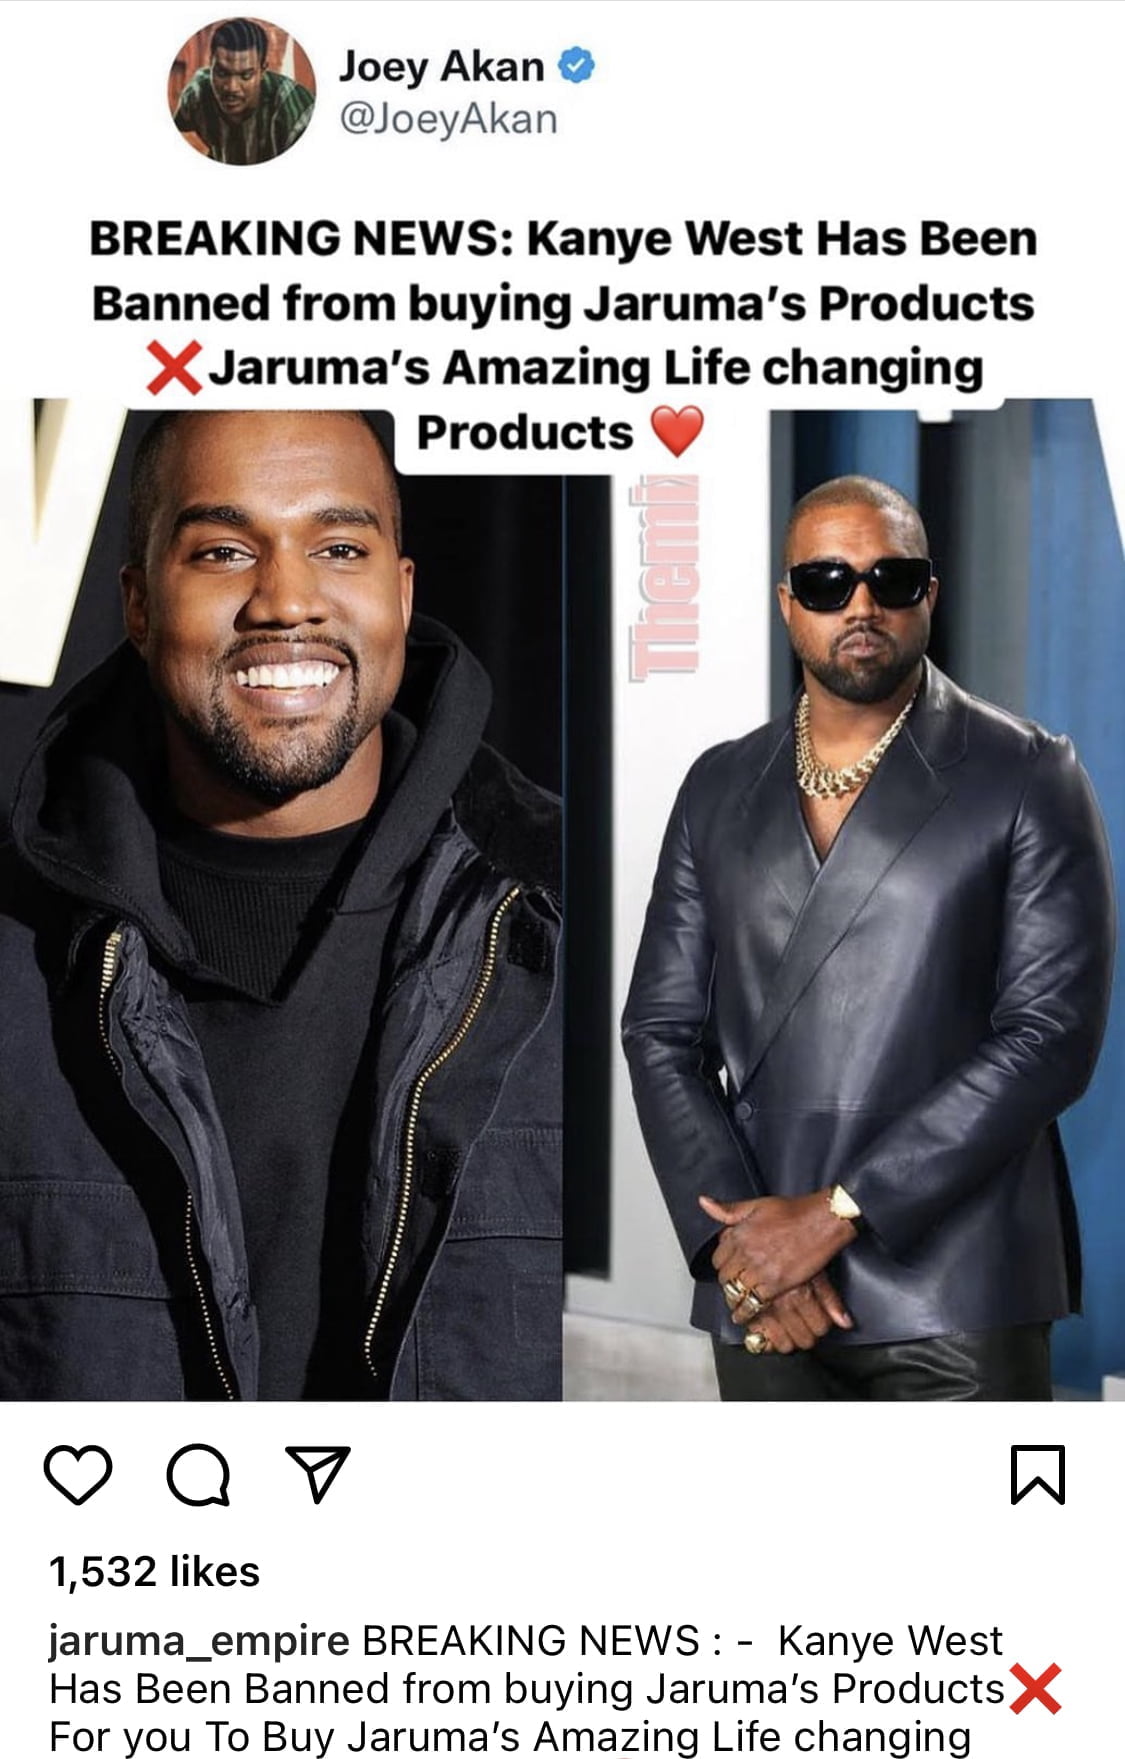 More Woes for Rapper Kanye West as Jaruma bans him from buying her ‘Kayamata’ products [photos]